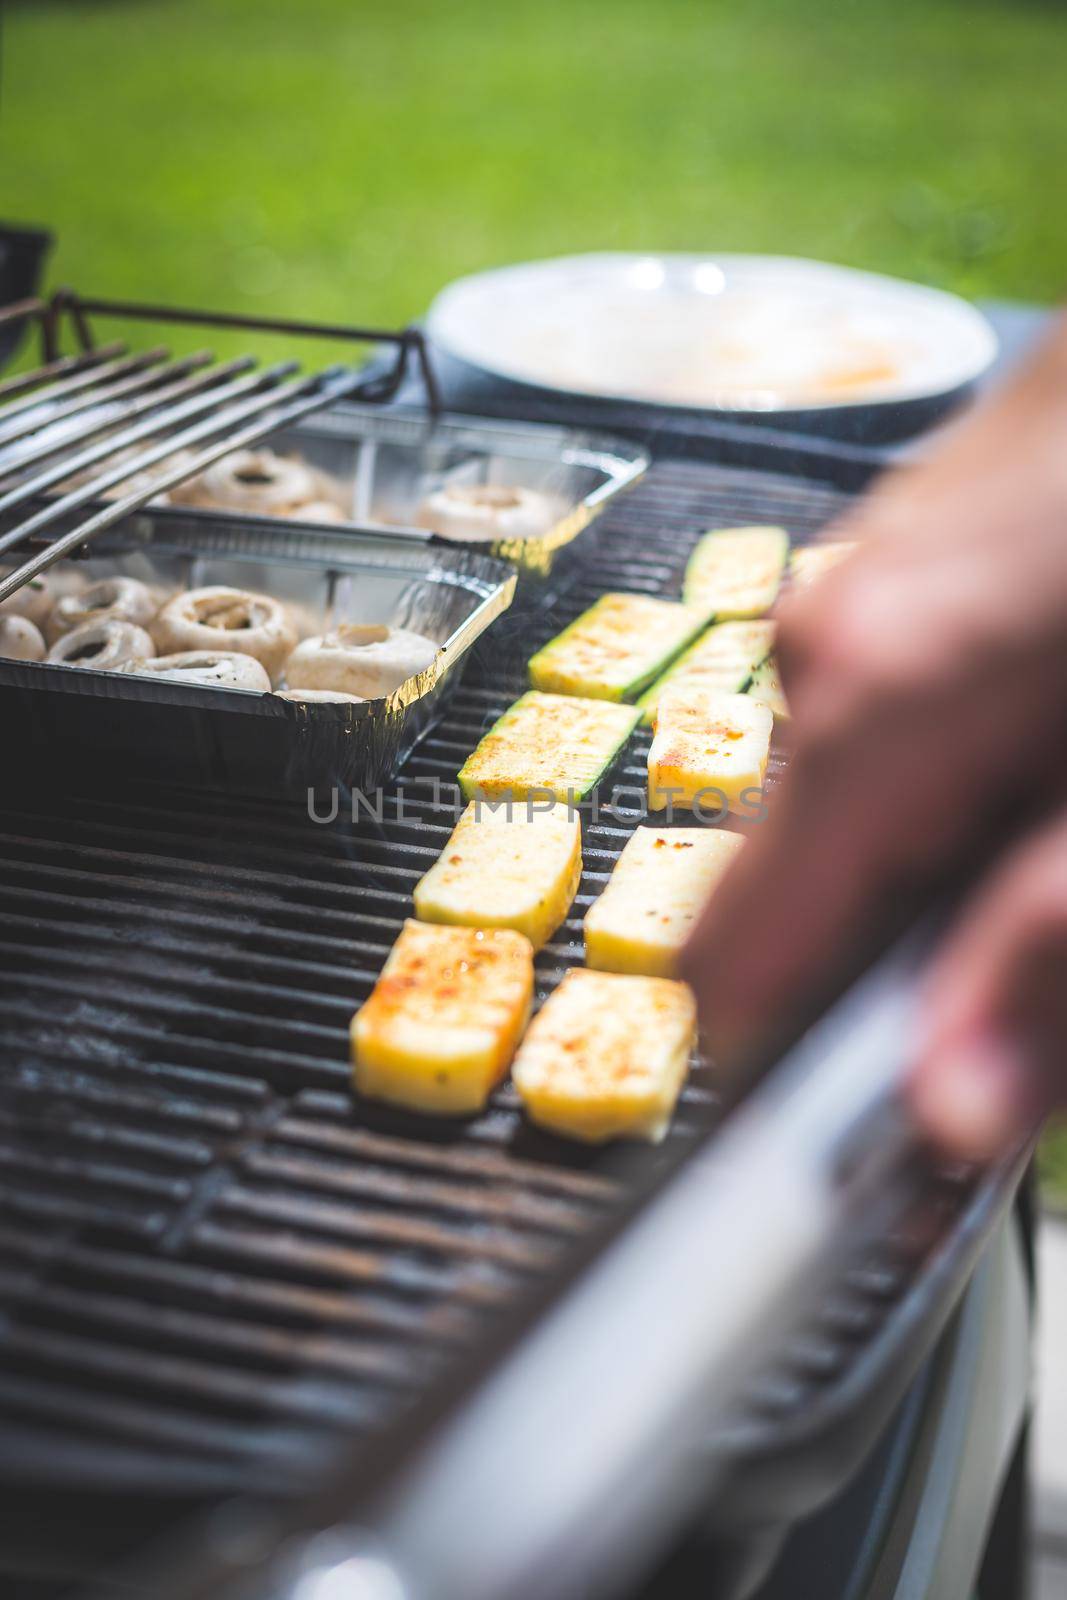 BBQ on weekend. Grill cheese and vegetables on gas grill. Outdoors. by Daxenbichler